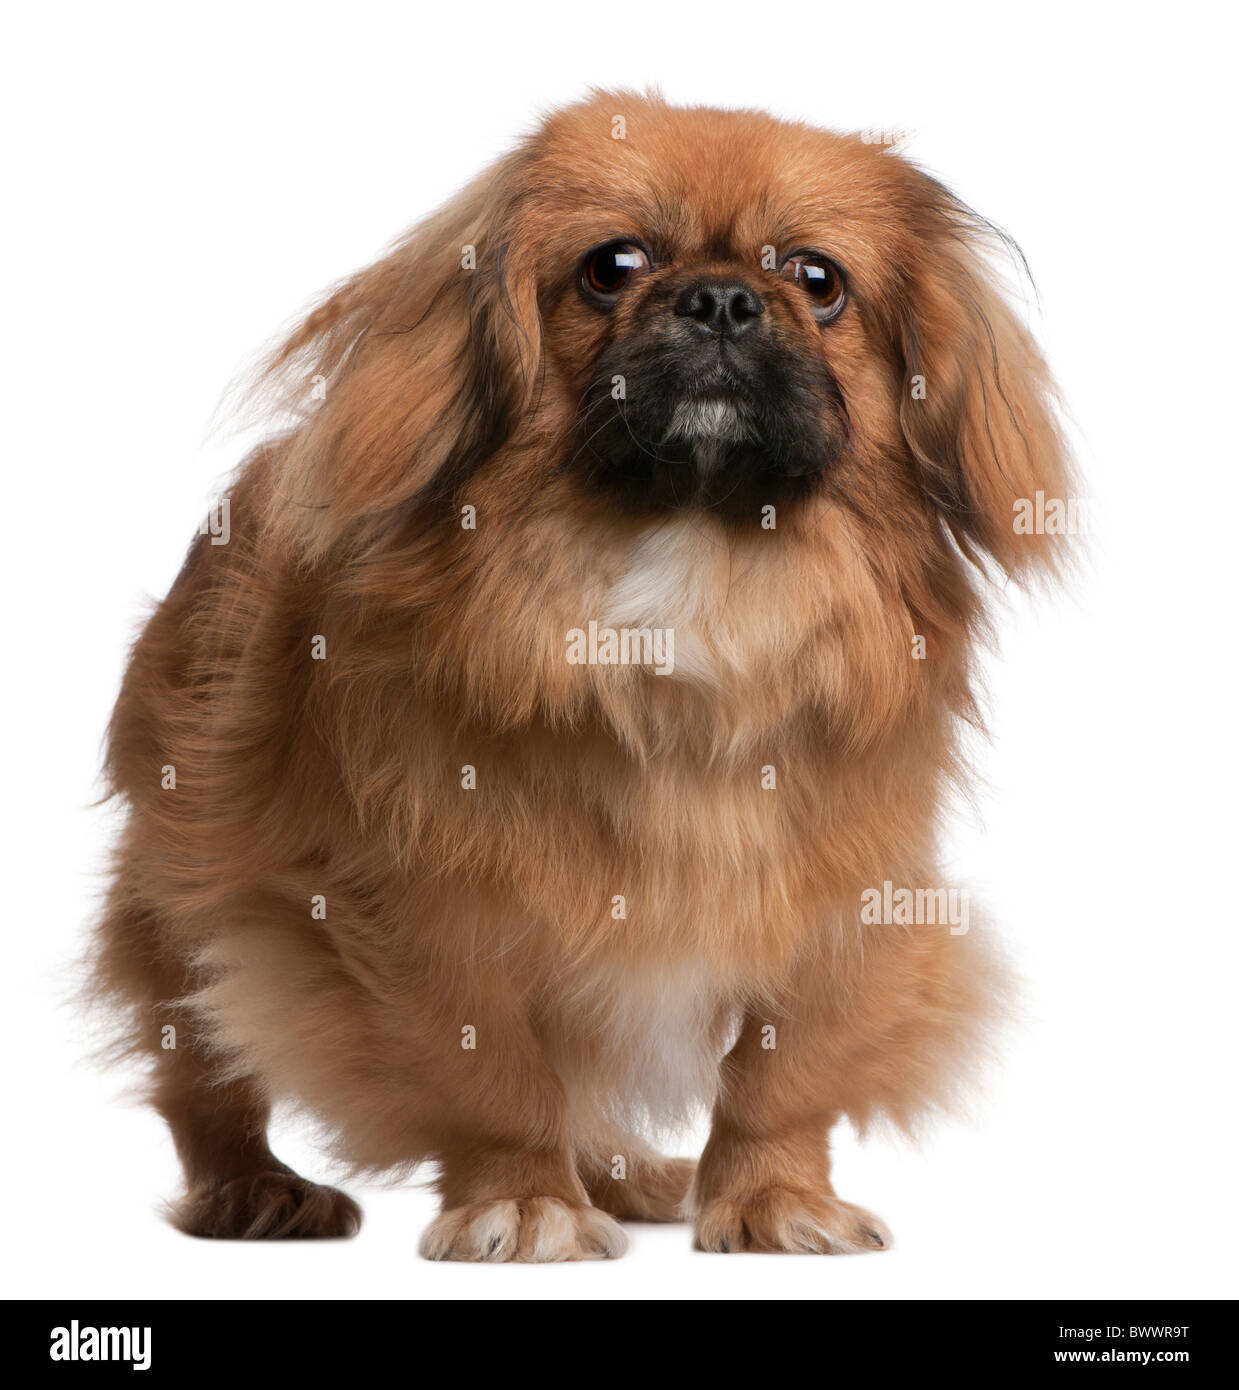 Pekingese, 8 months old, standing in front of white background Stock Photo